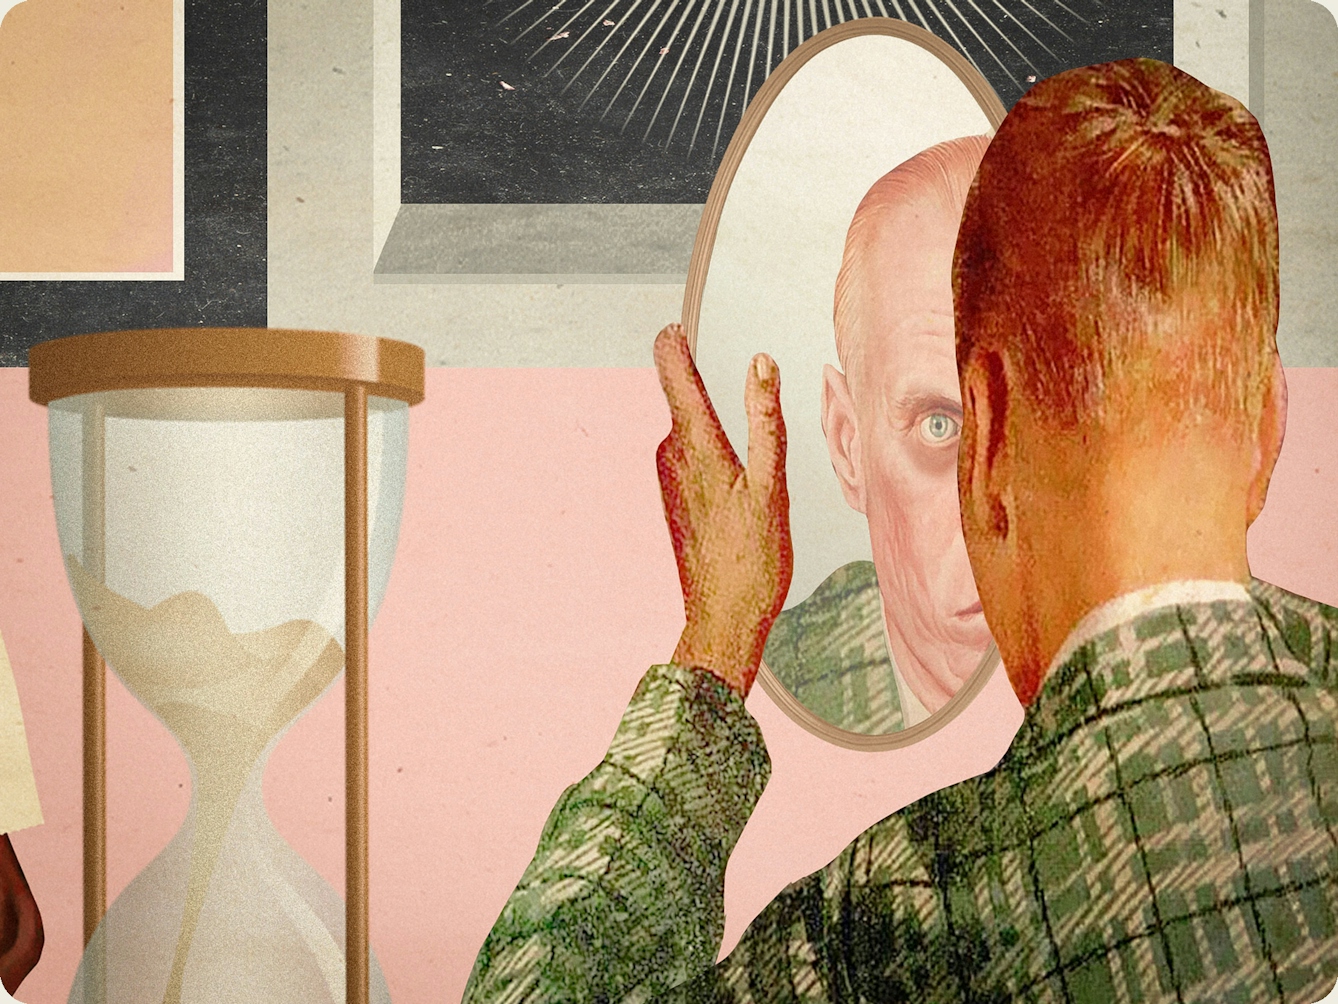 Detail from a larger mixed media digital artwork combining found imagery from vintage magazines and books with painted and textured elements. The overall hues are pastel yellows, pinks and greys with elements of harsh reds and oranges.  To the far right foreground is a drawing of the back of the head and shoulders of a young man wearing a green checked jacket holding up an oval mirror in front of his face. His face in the reflection is of an old version of himself. To his left is a drawing of an hourglass with the sand running through.